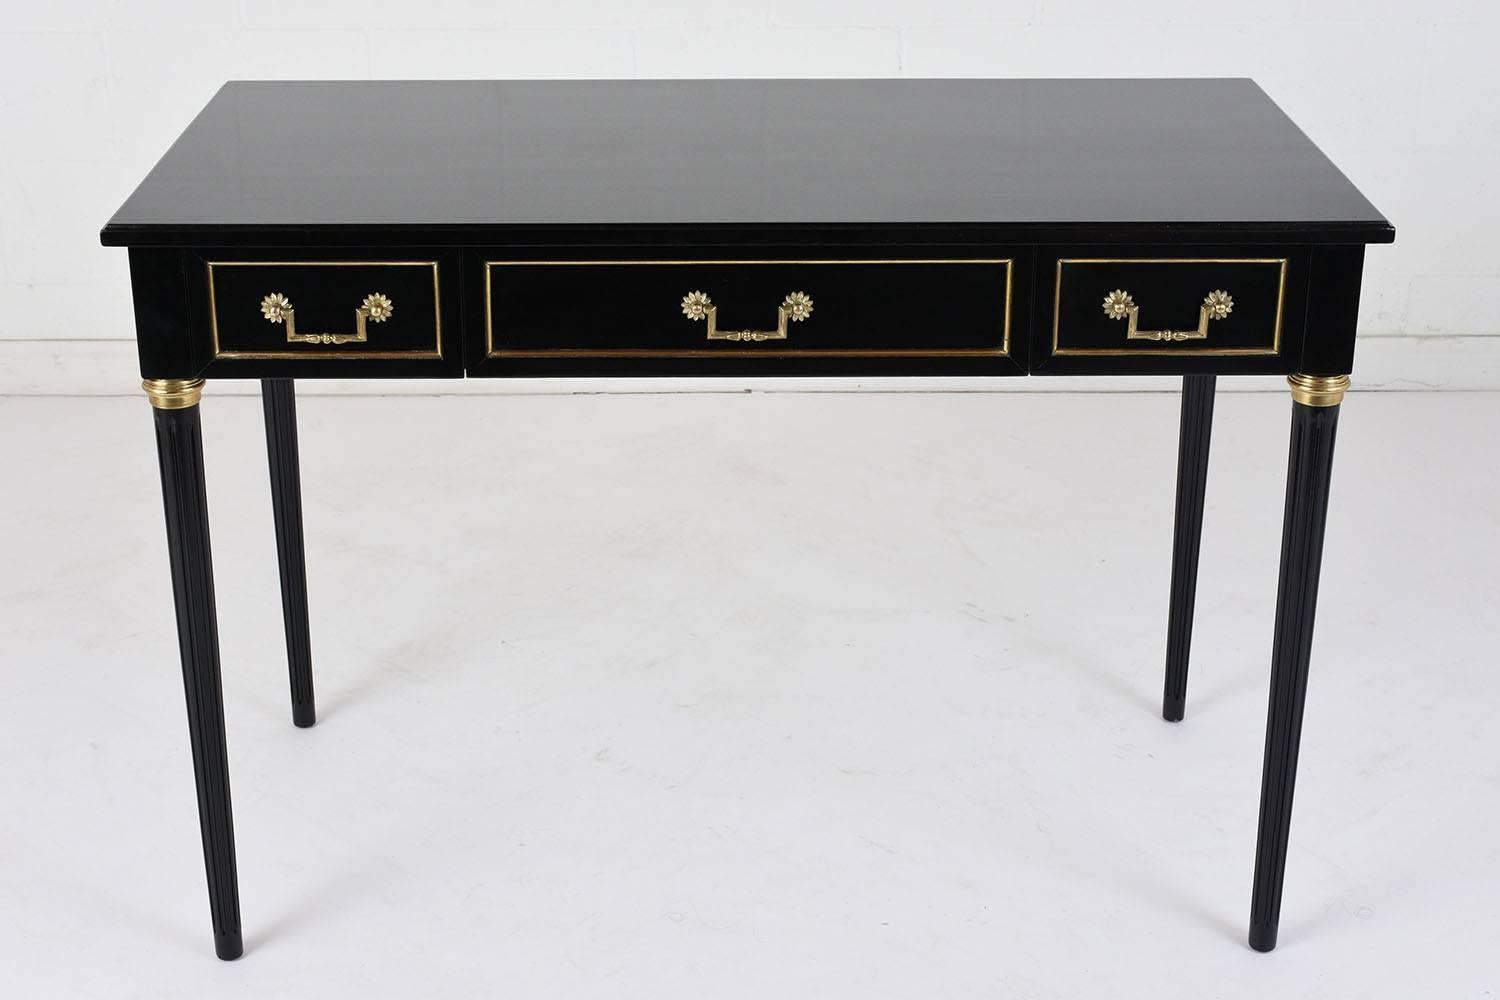 This 1900s French Louis XVI-style desk is made of mahogany wood ebonized in a deep black color with a lacquered finish. The desk features three drawers with brass moulding accents an decorative brass handles with rosettes details. The carved legs